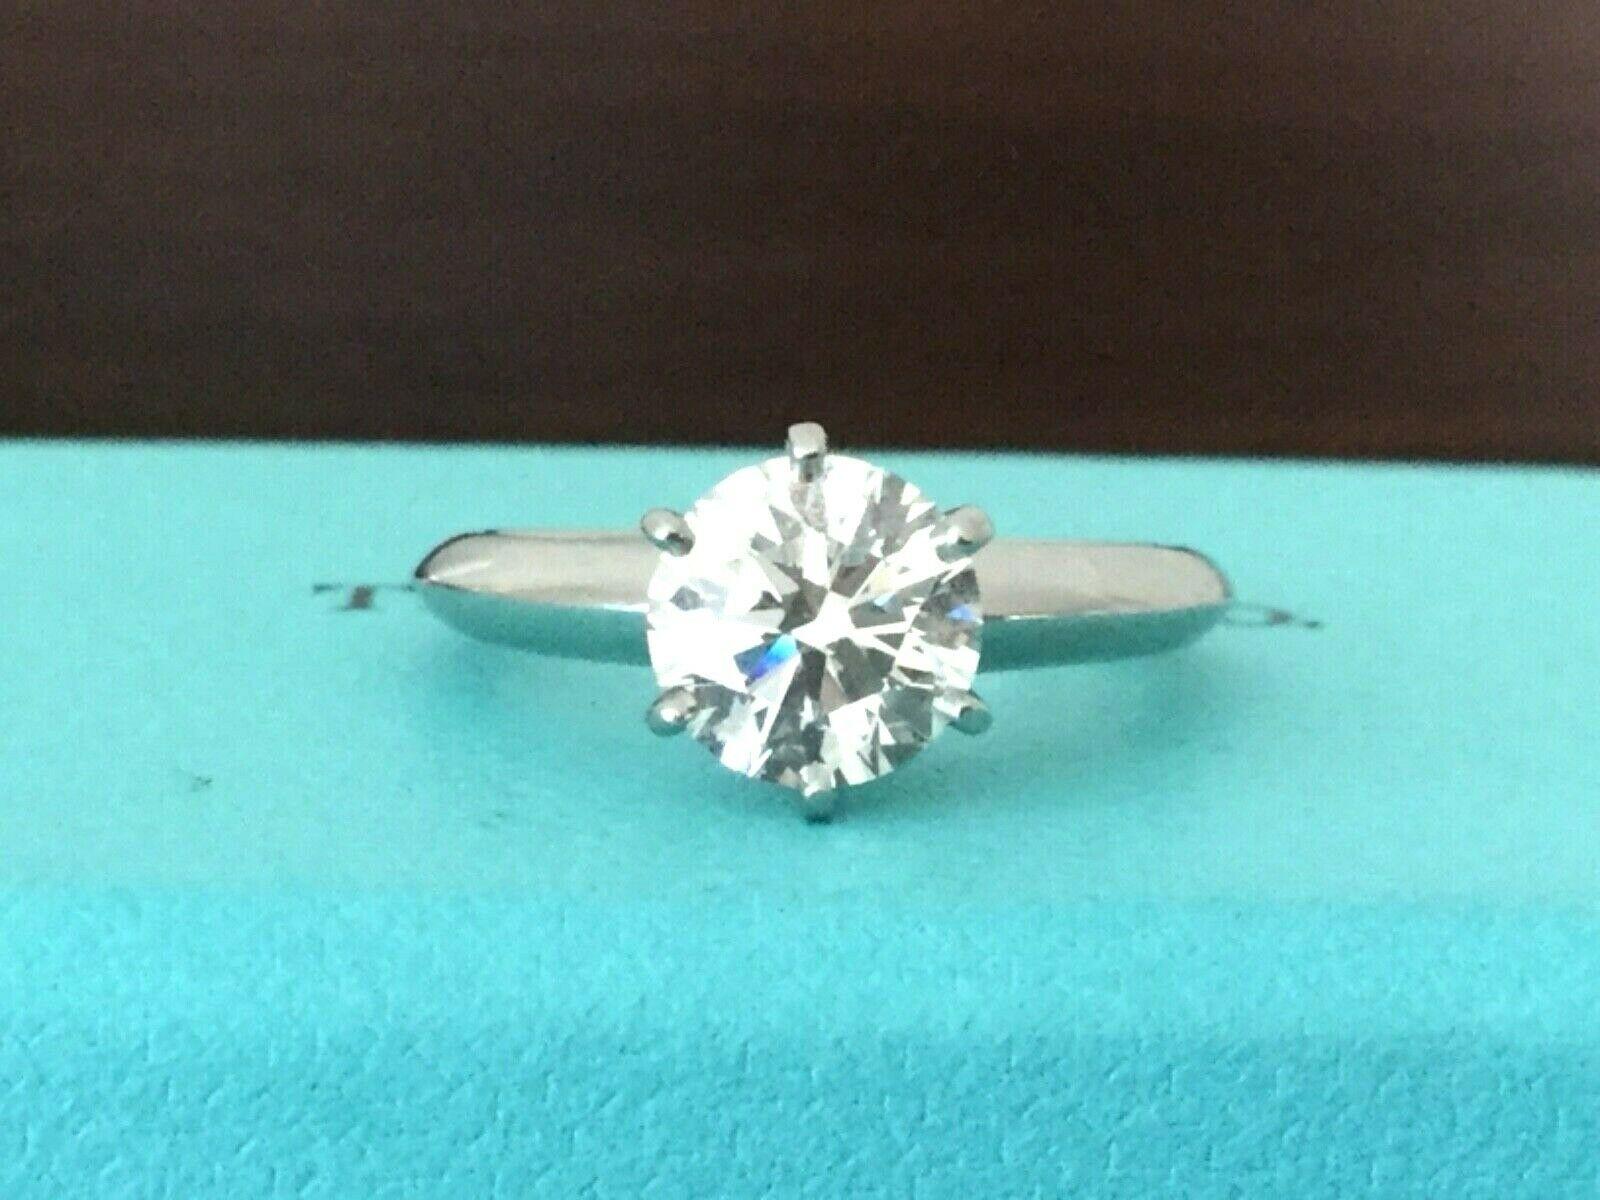 Being offered for your consideration is a like new Tiffany & Co Platinum and Diamond 1.87 carat natural round engagement ring set in the classic 6 prong setting. 

WORDS CANNOT DESCRIBE THIS AMAZING RING - This stunner is just about a 2 carat round